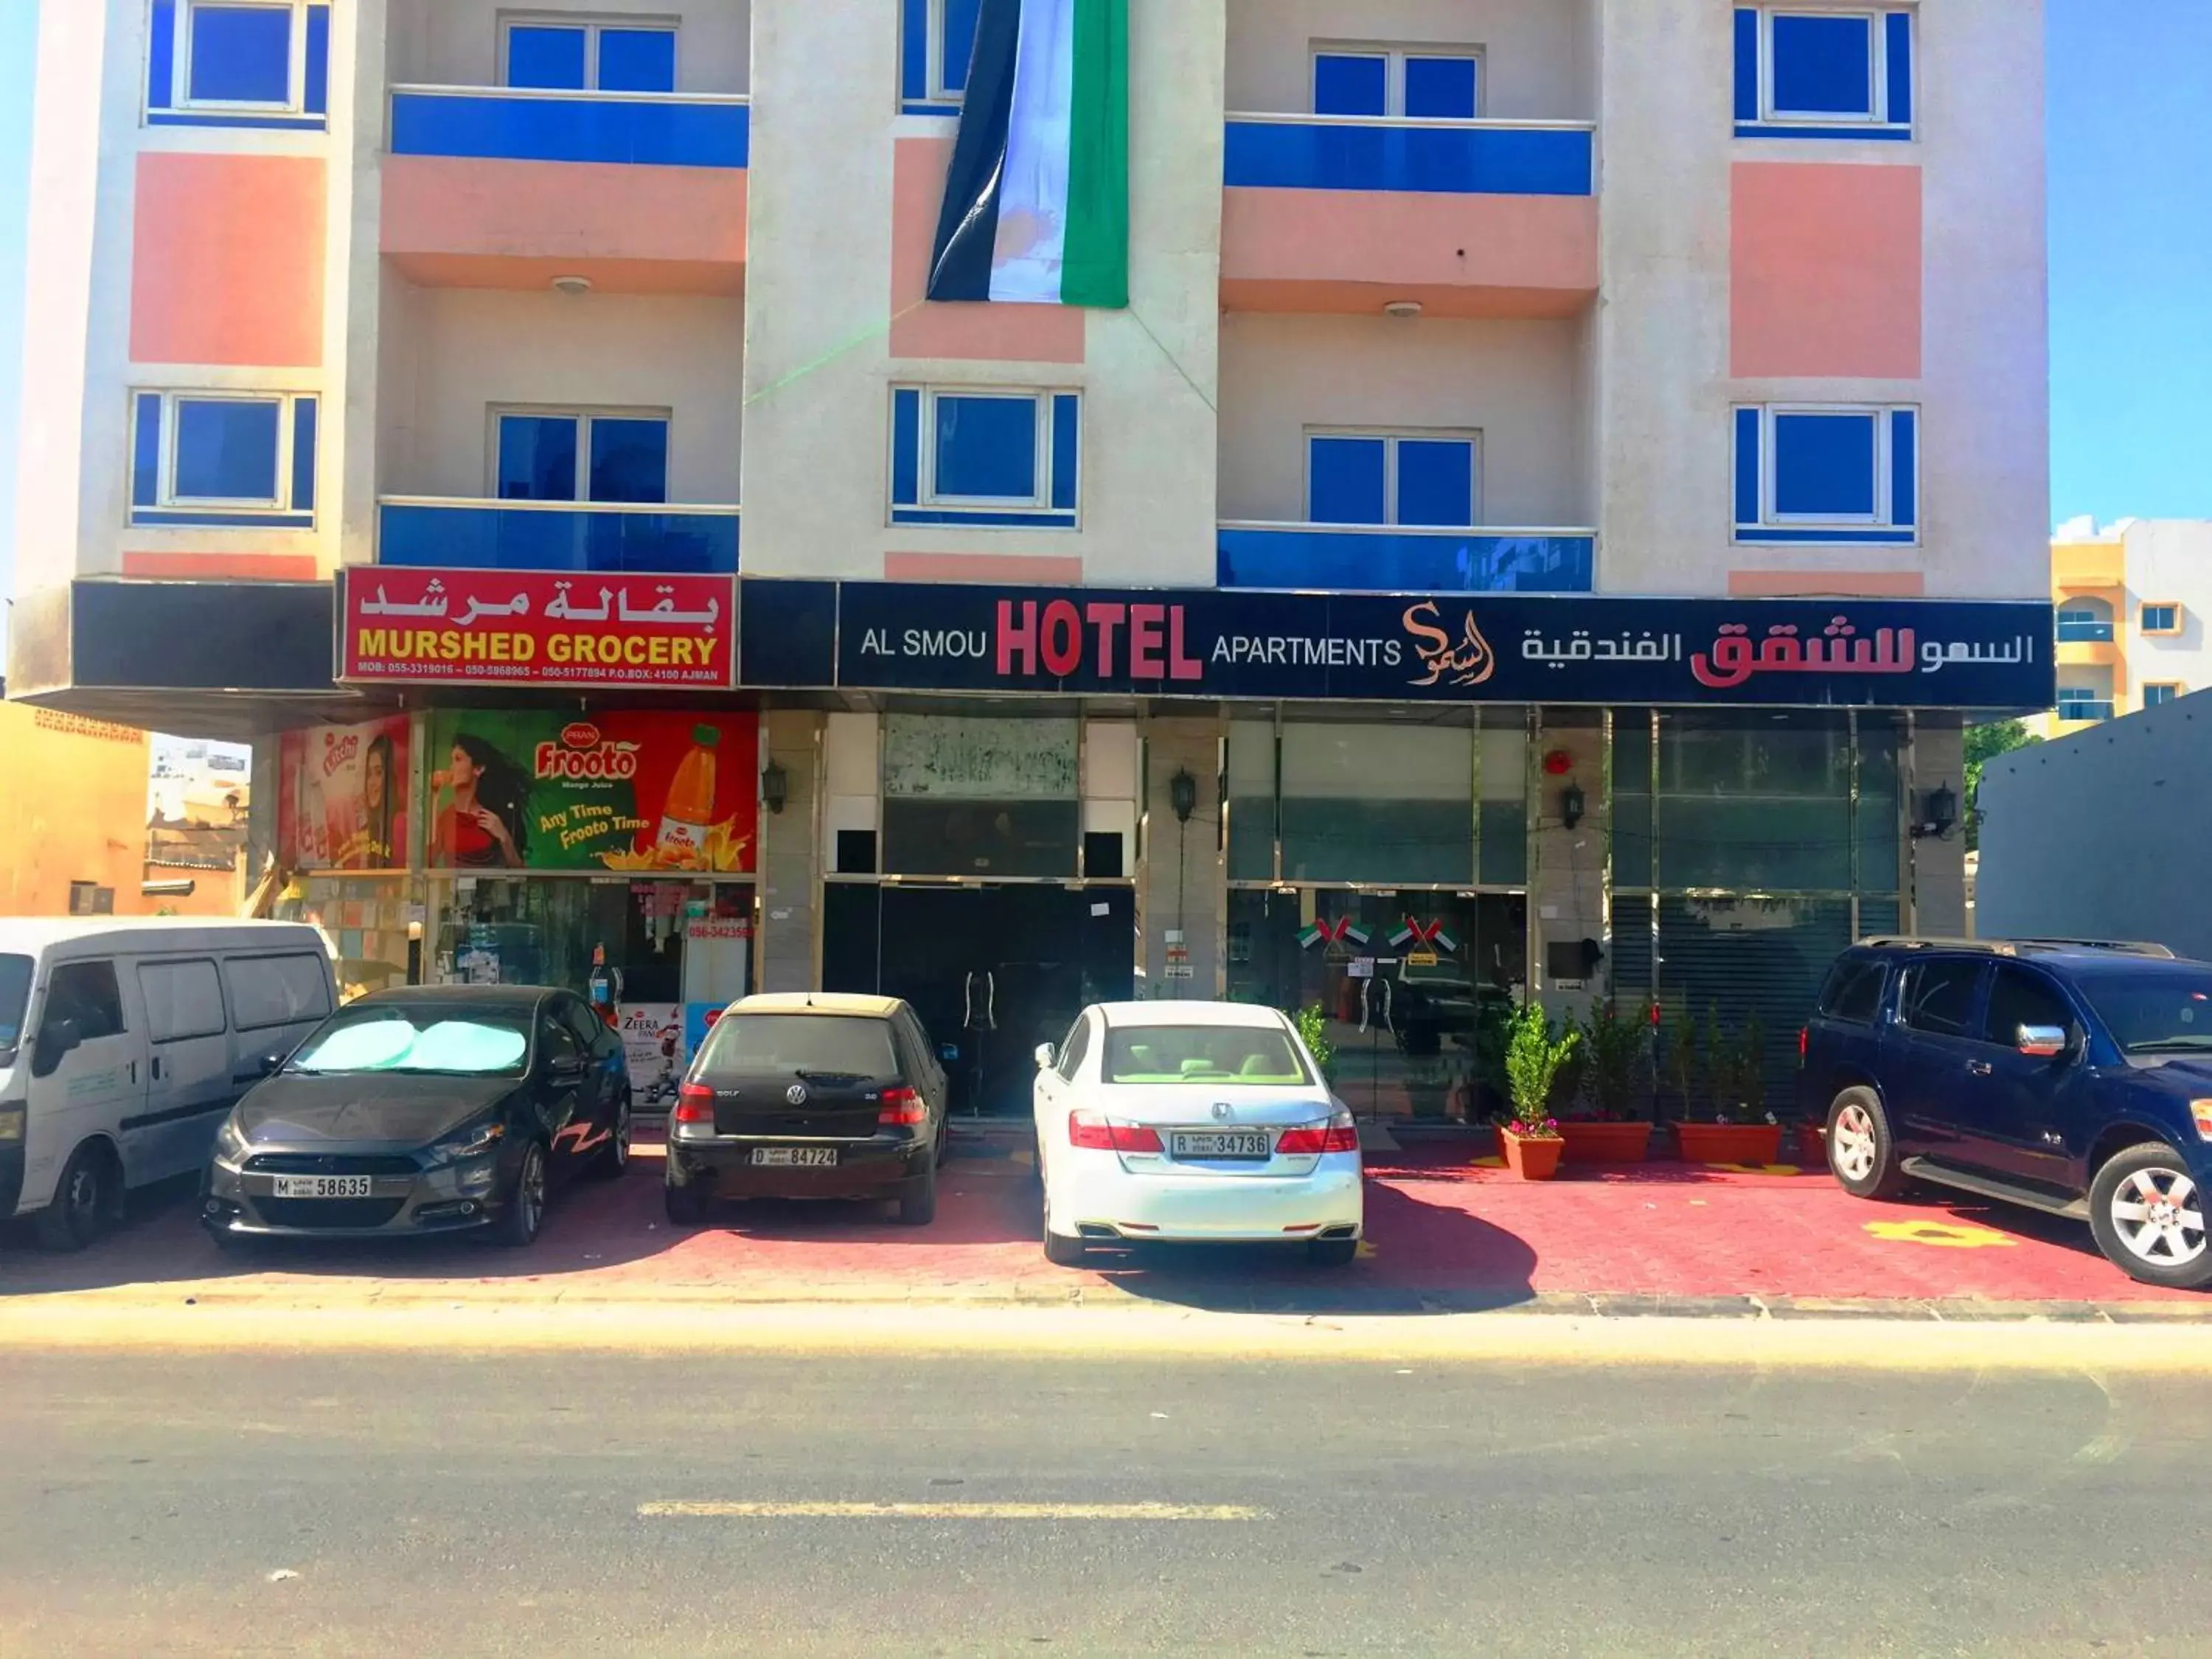 Property Building in Al Smou Hotel Apartments - MAHA HOSPITALITY GROUP